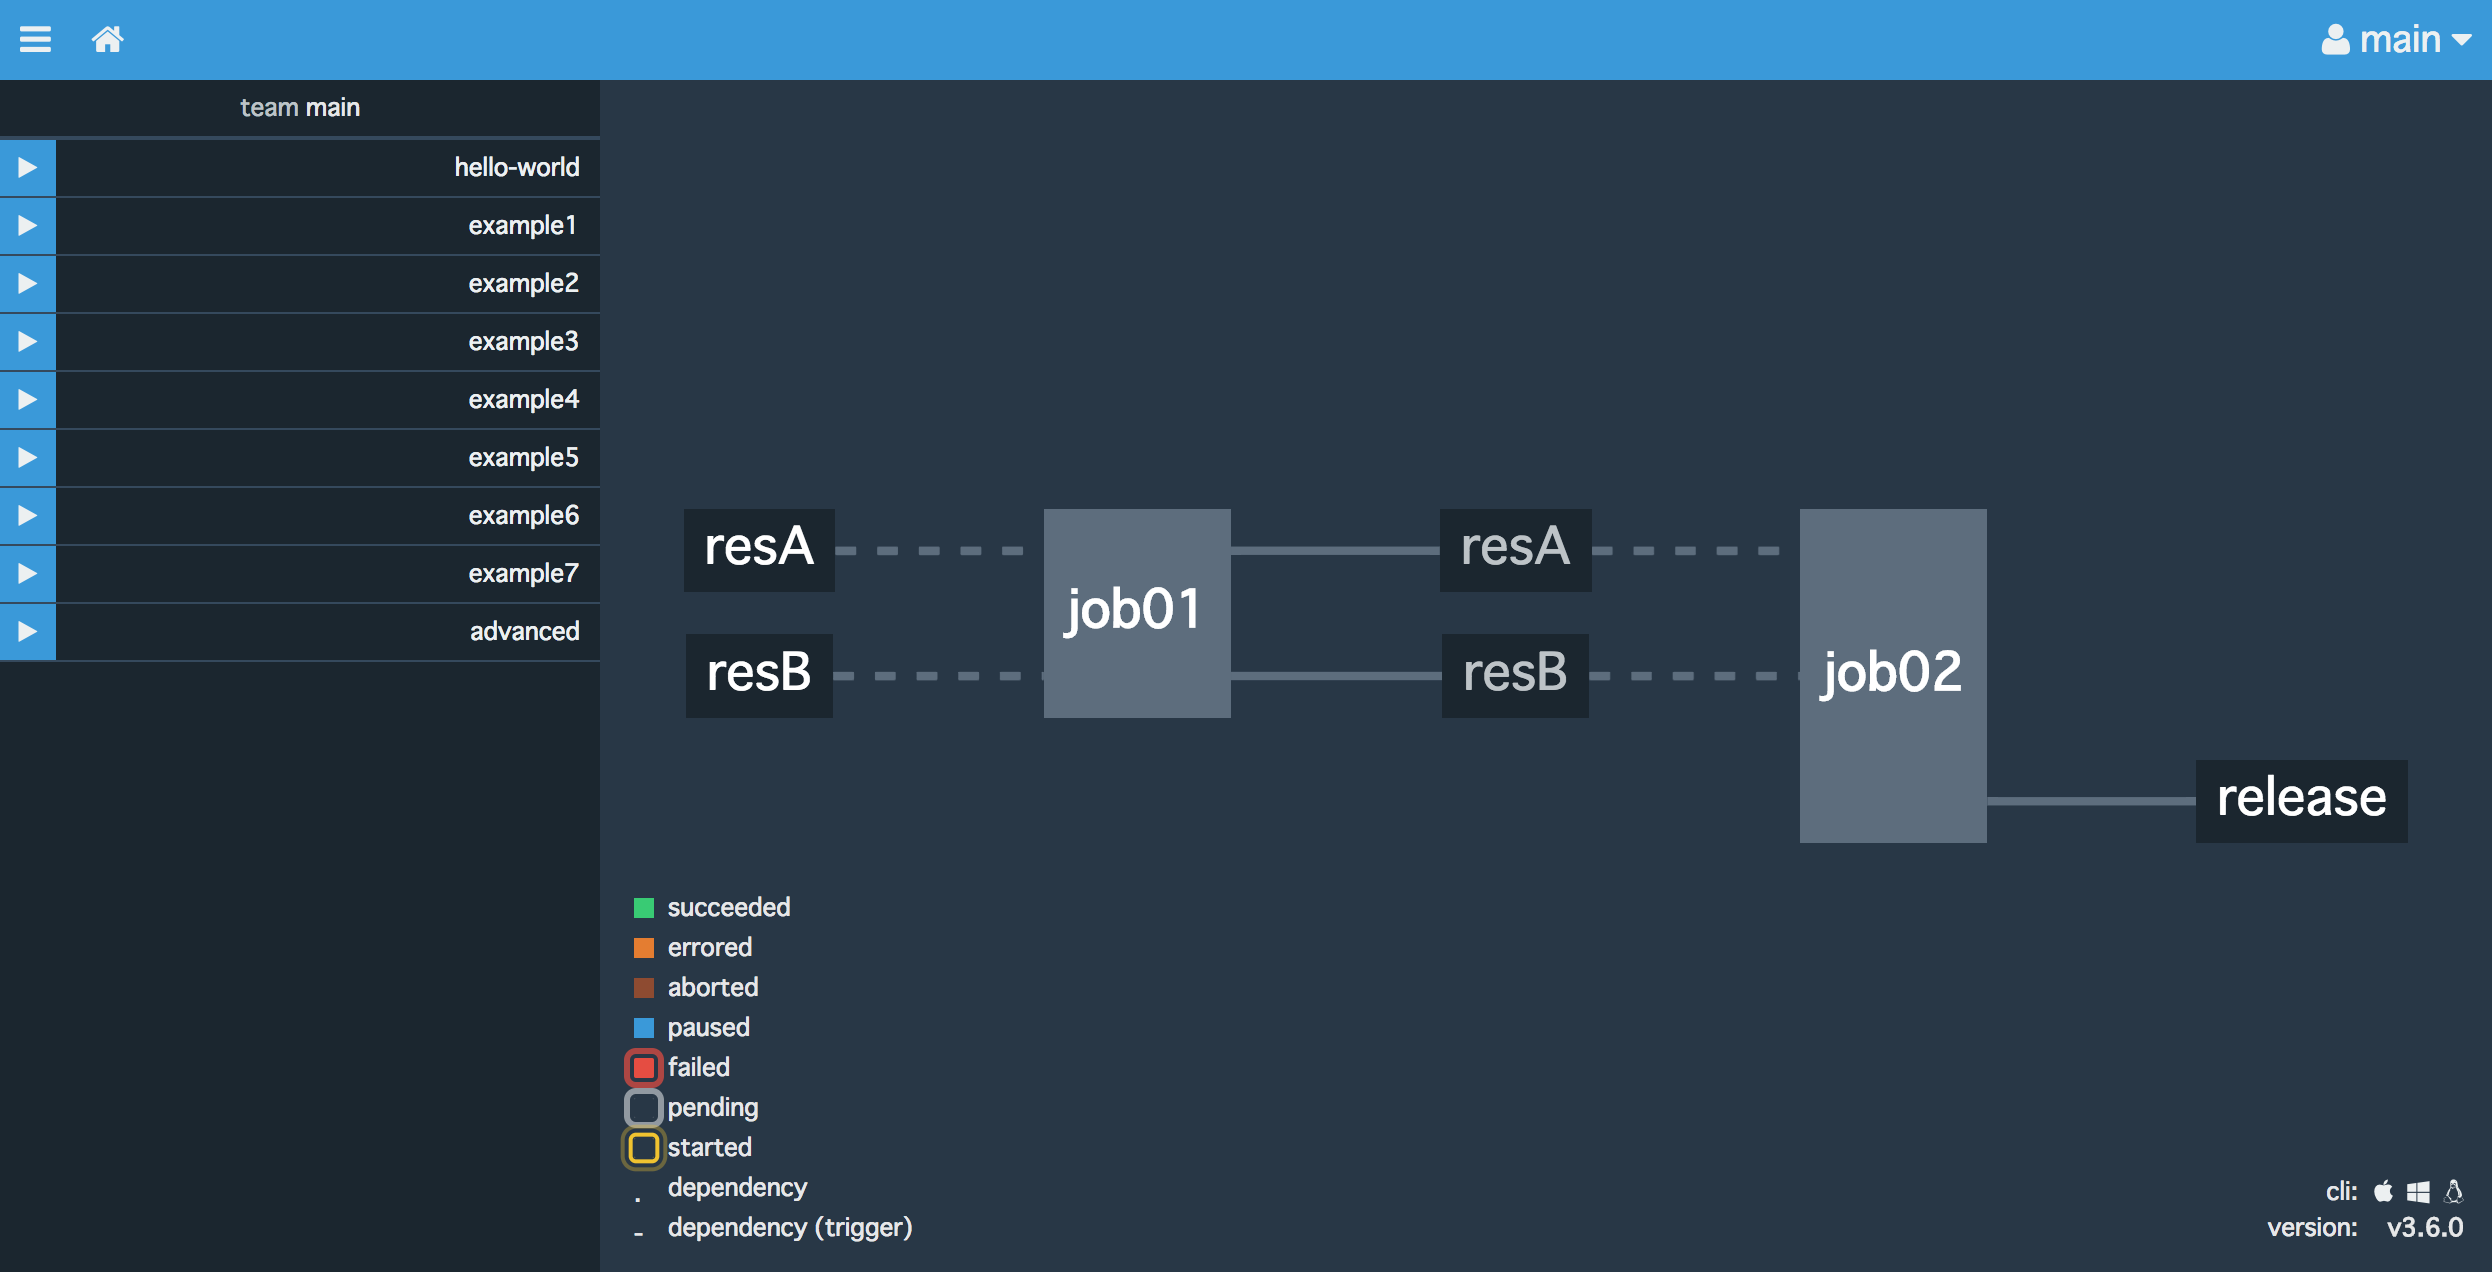 screencapture-localhost-8080-teams-main-pipelines-example6-1512699647676.png